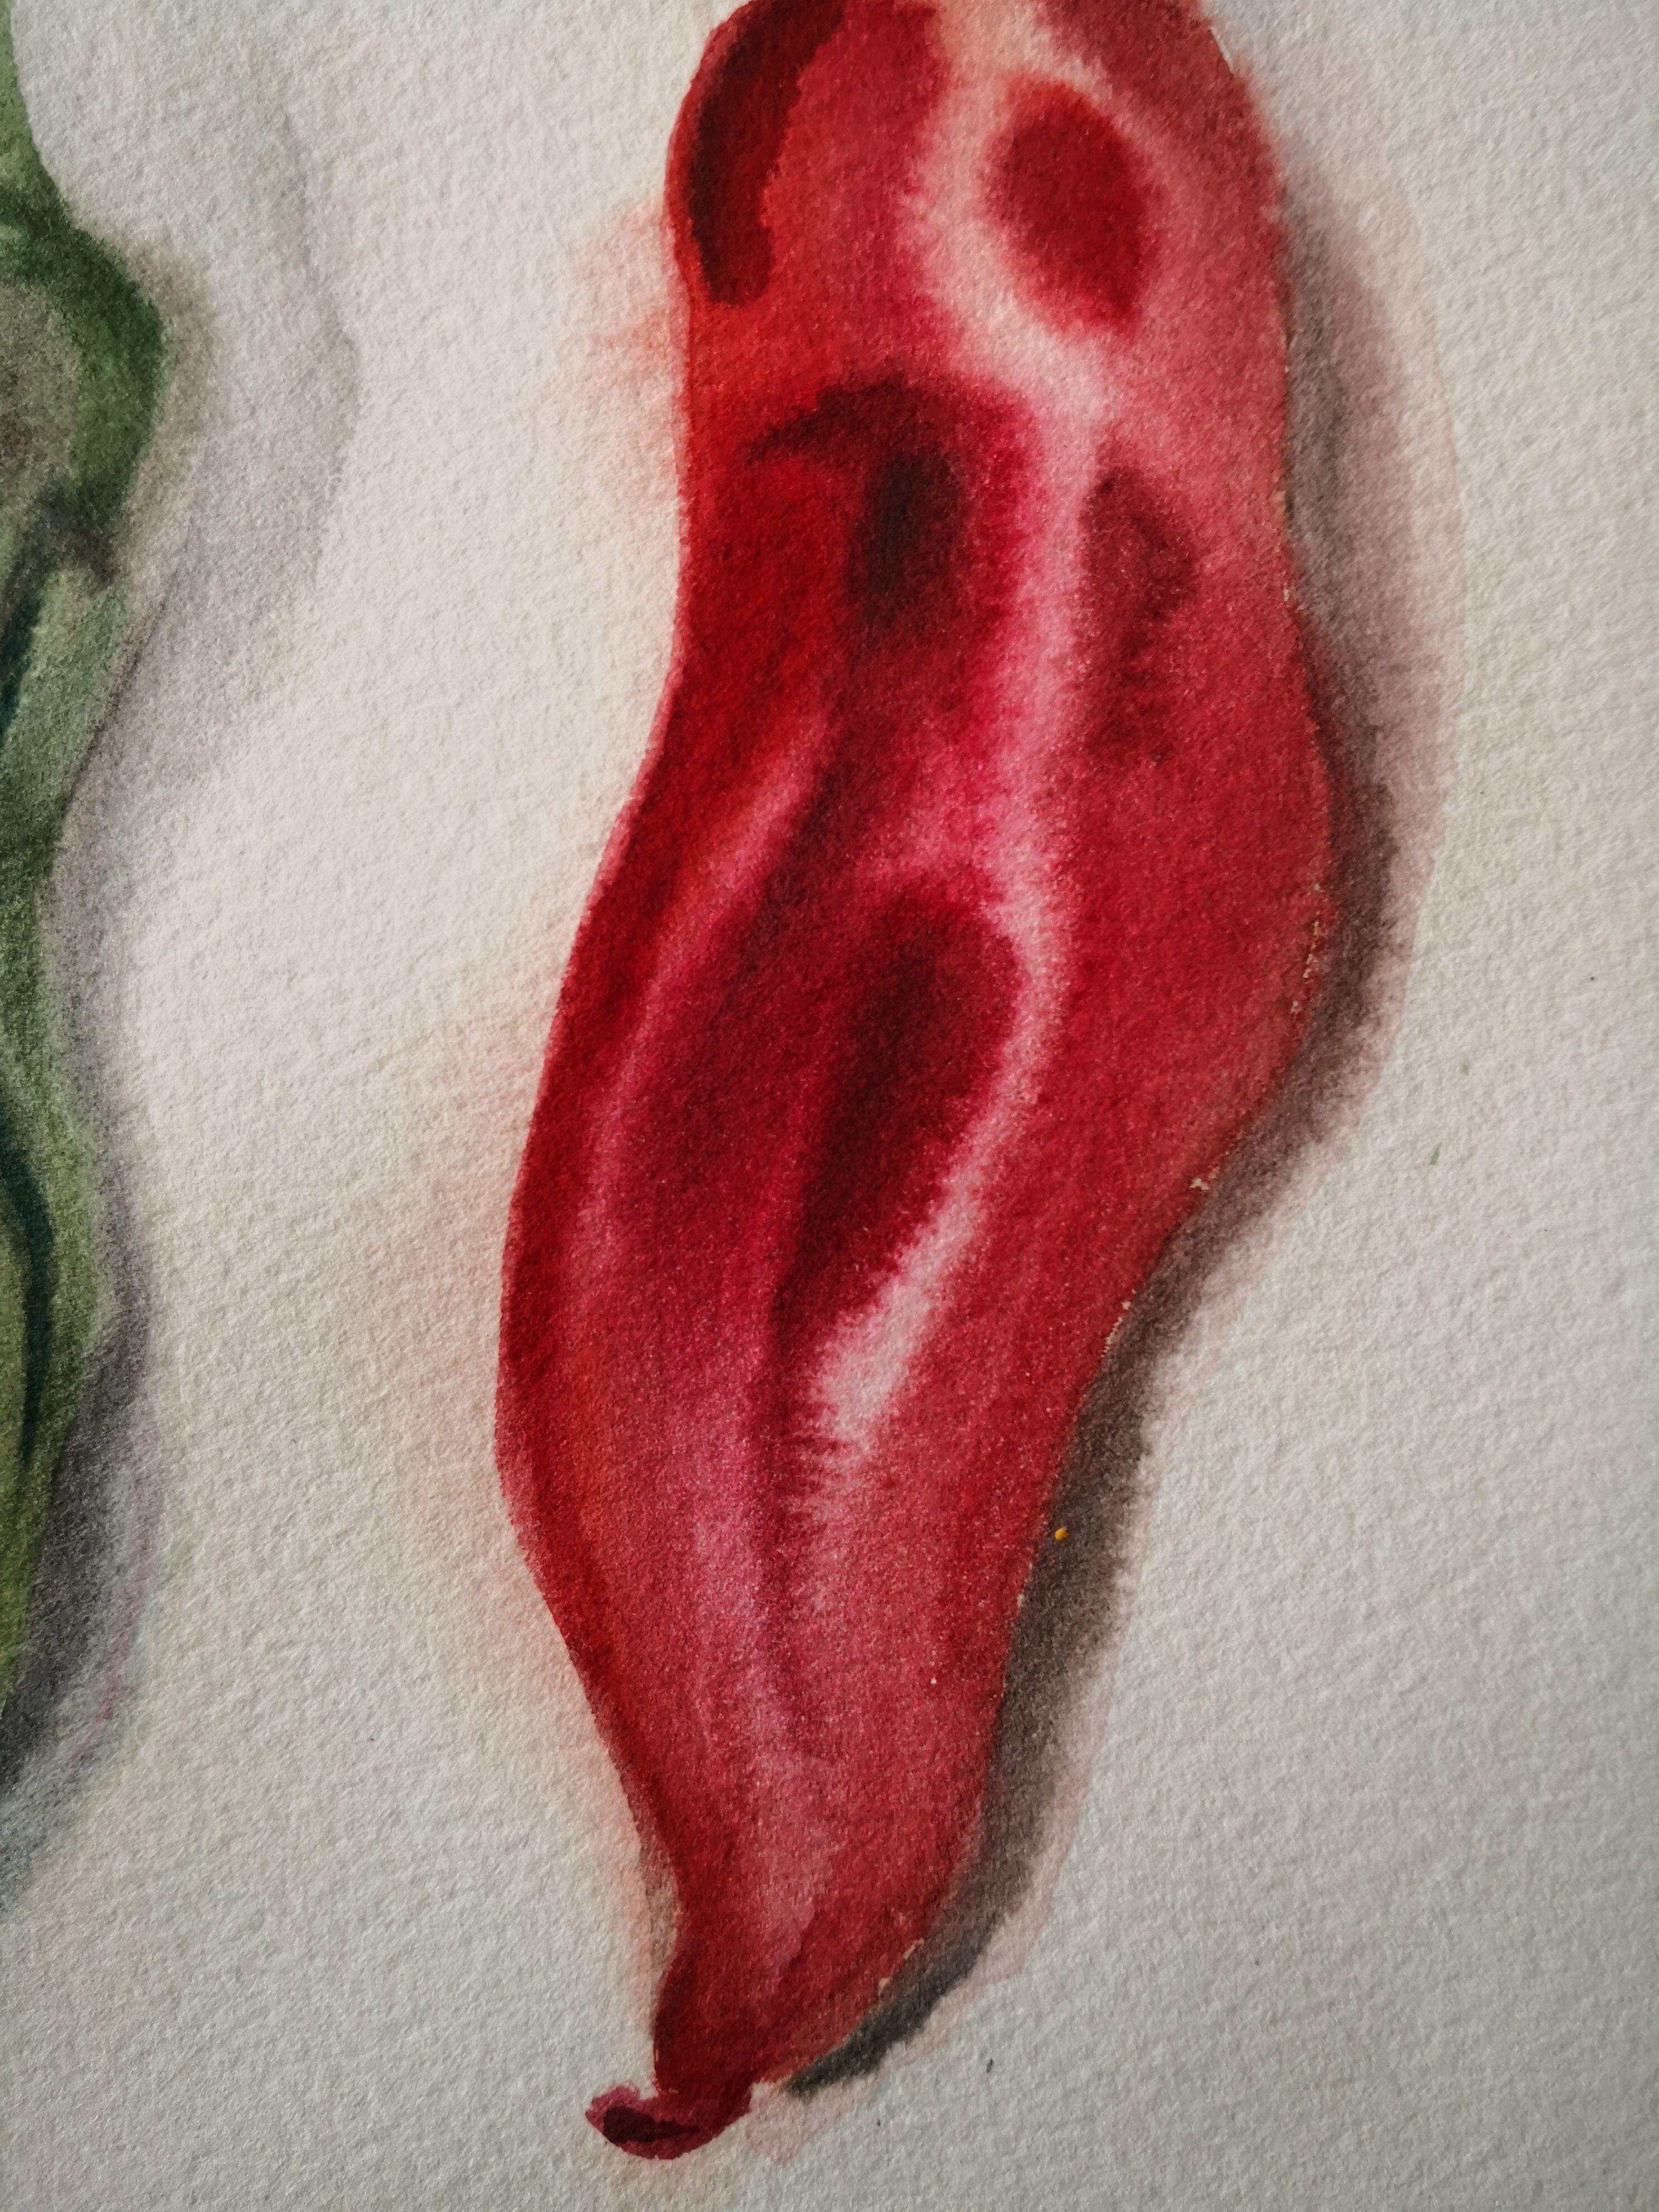 Green and Red Peppers, Painting, Watercolor on Paper For Sale 2